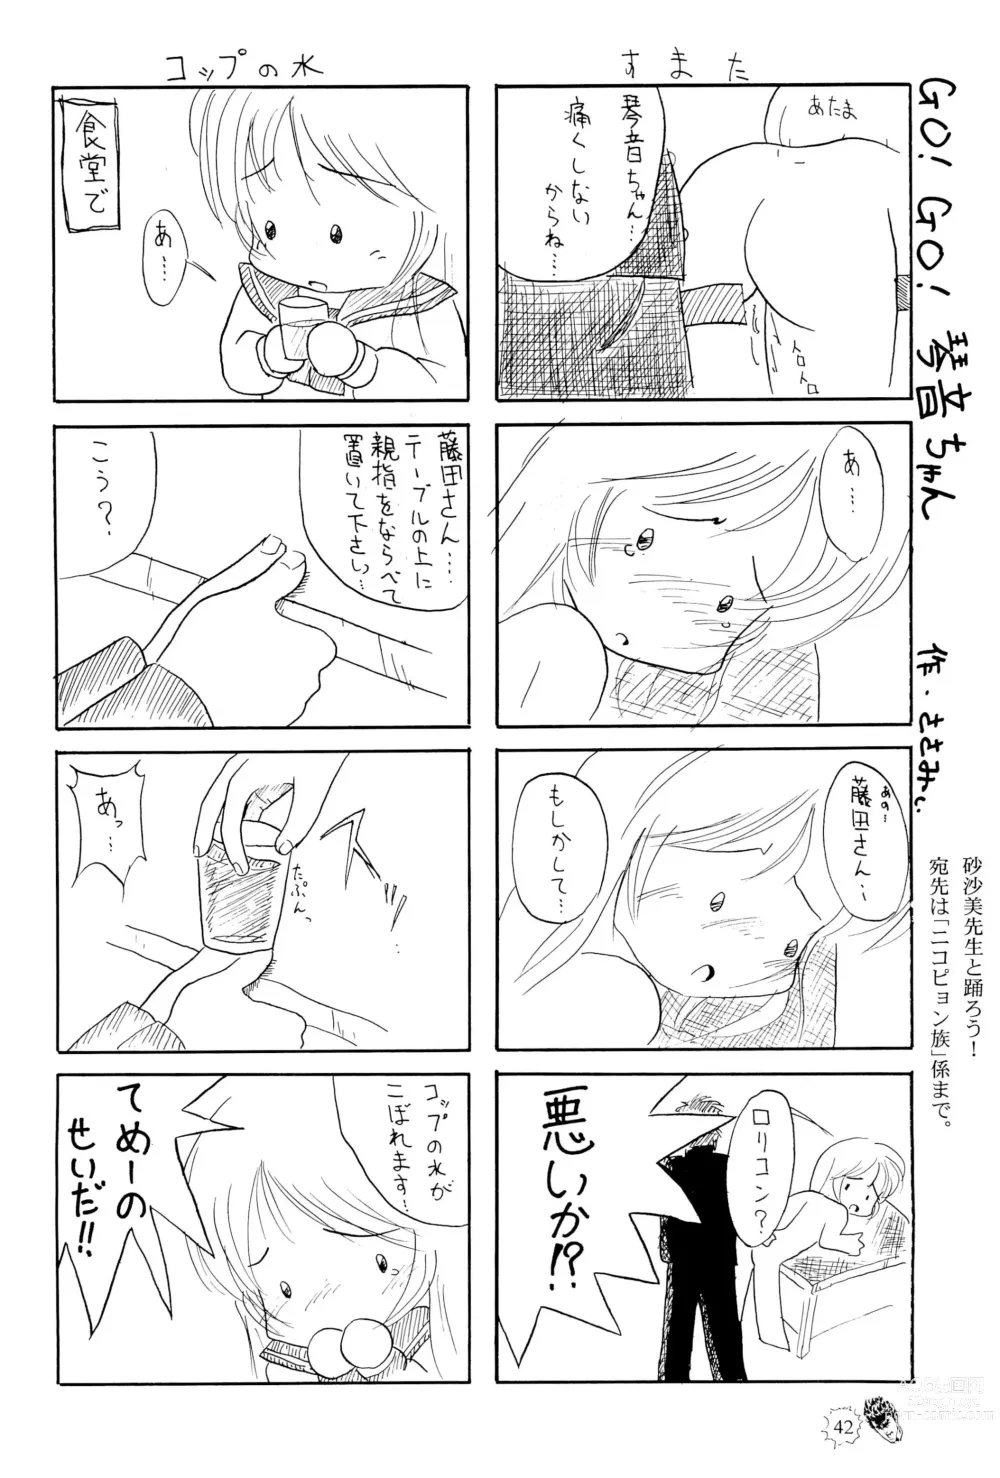 Page 42 of doujinshi CHIBICKERS 4